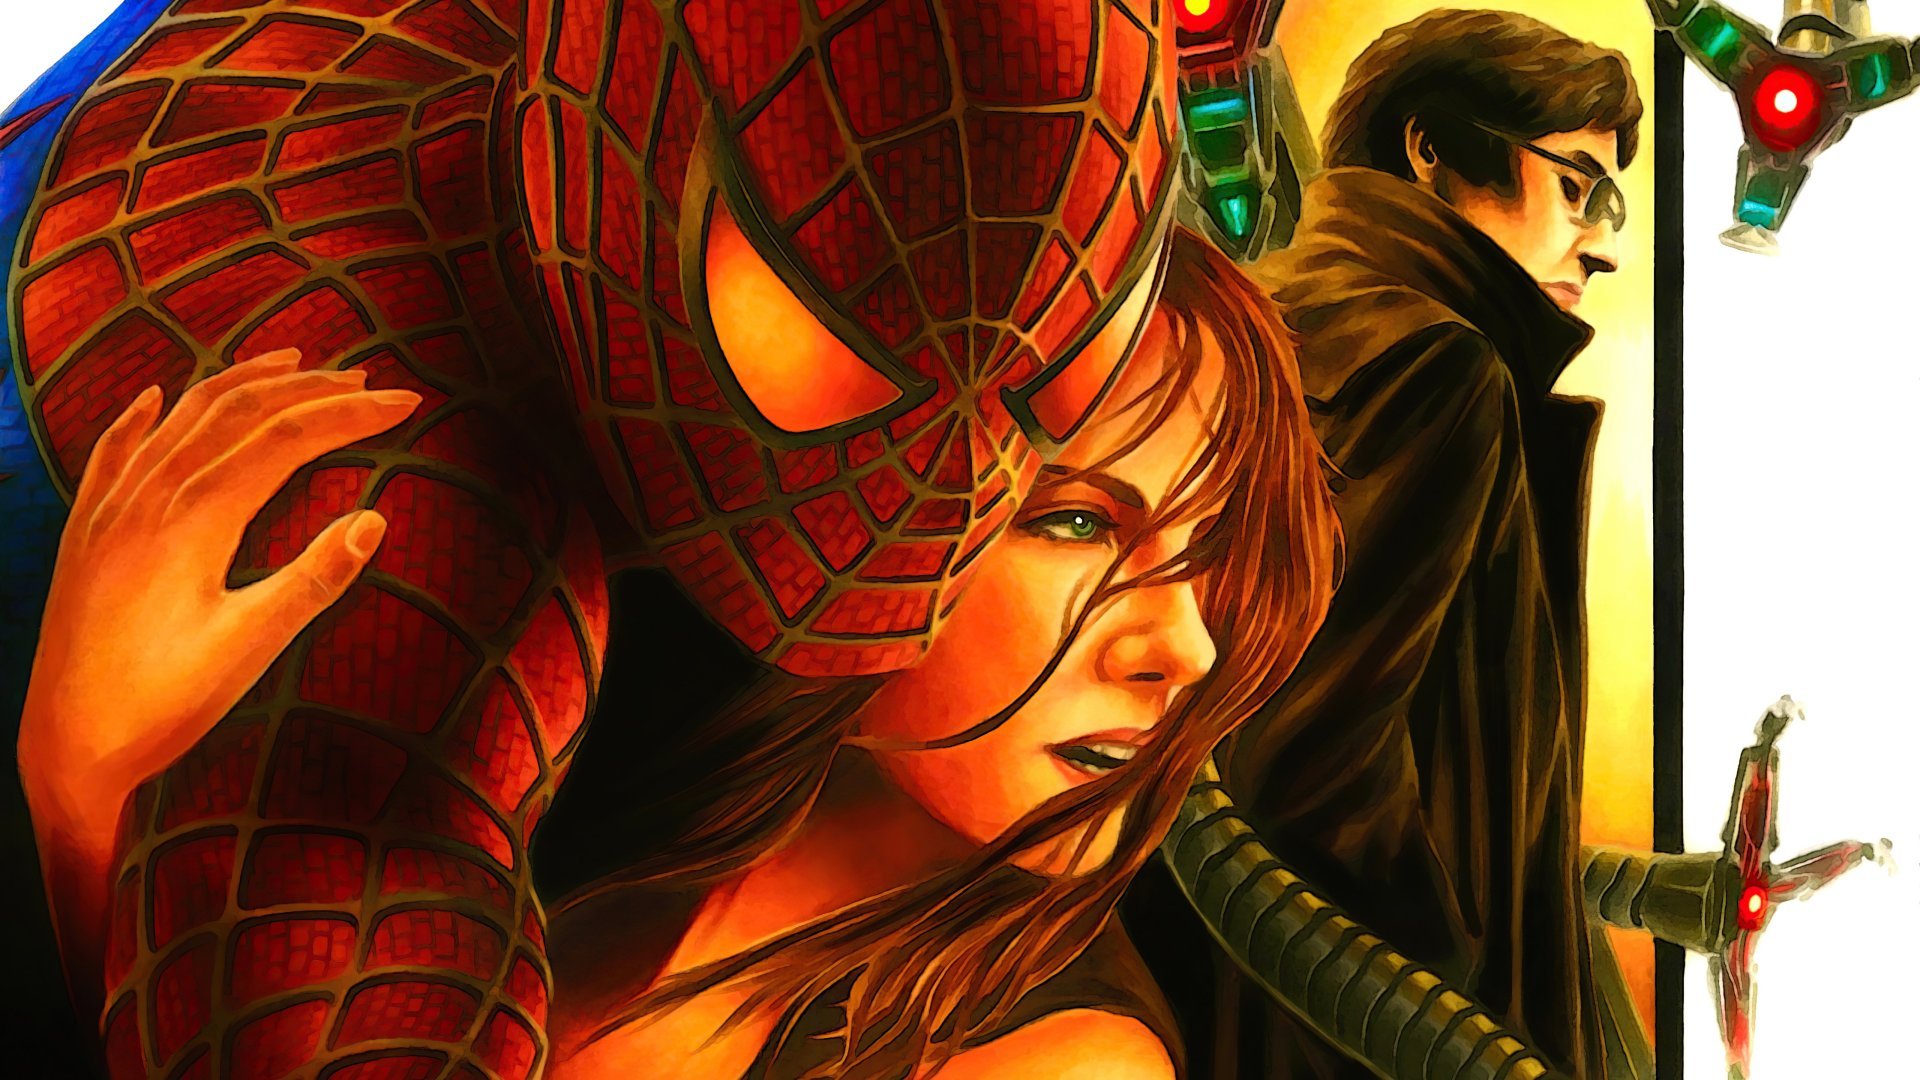 Spider Man and Mary Jane Illustration Wallpaper 5k Ultra HD ID:11600